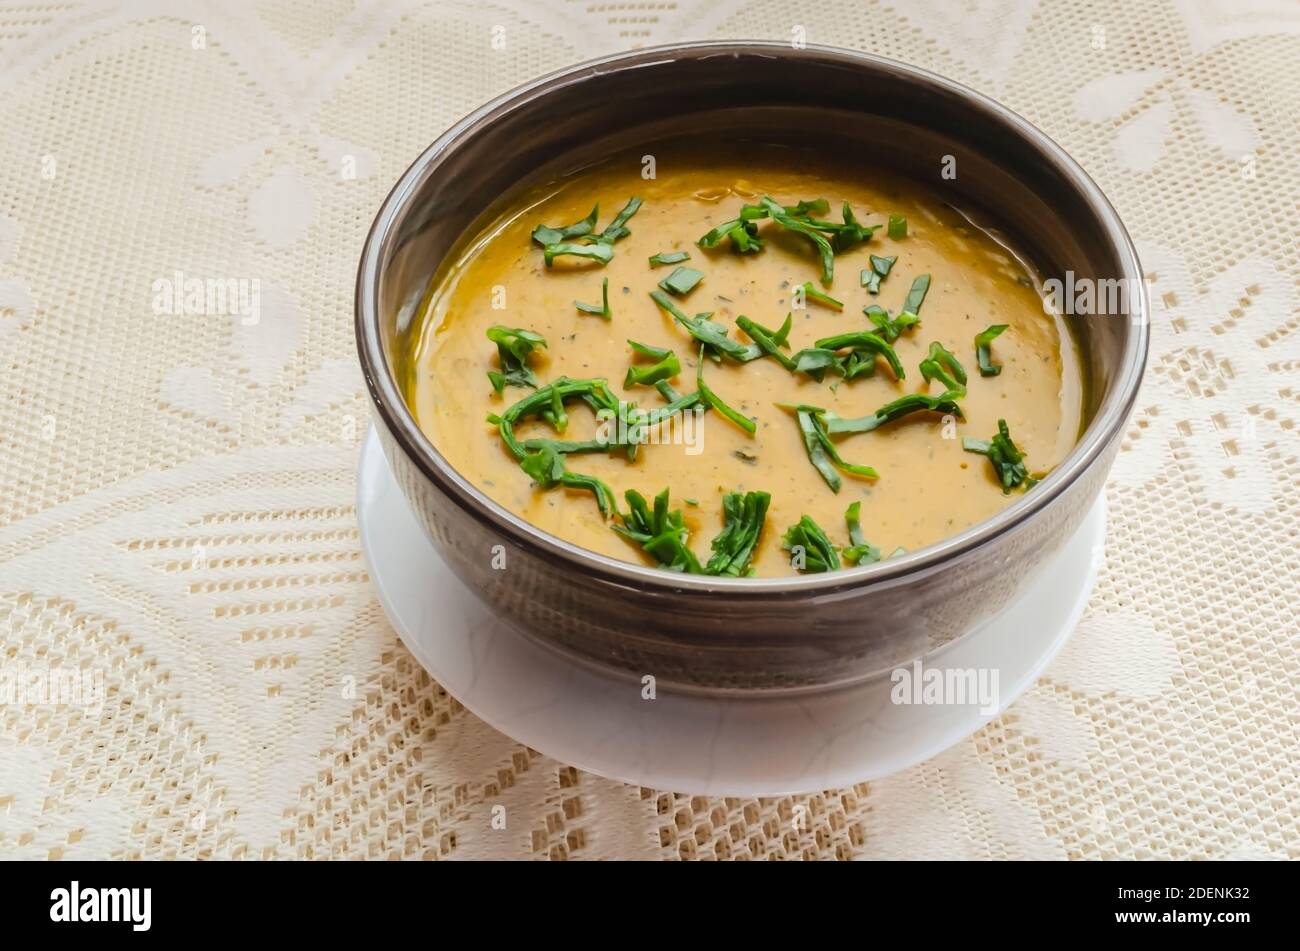 On a lacey background is a brown striped bowl of rich thick meatless pumpkin soup, garnished with green spinach. Stock Photo